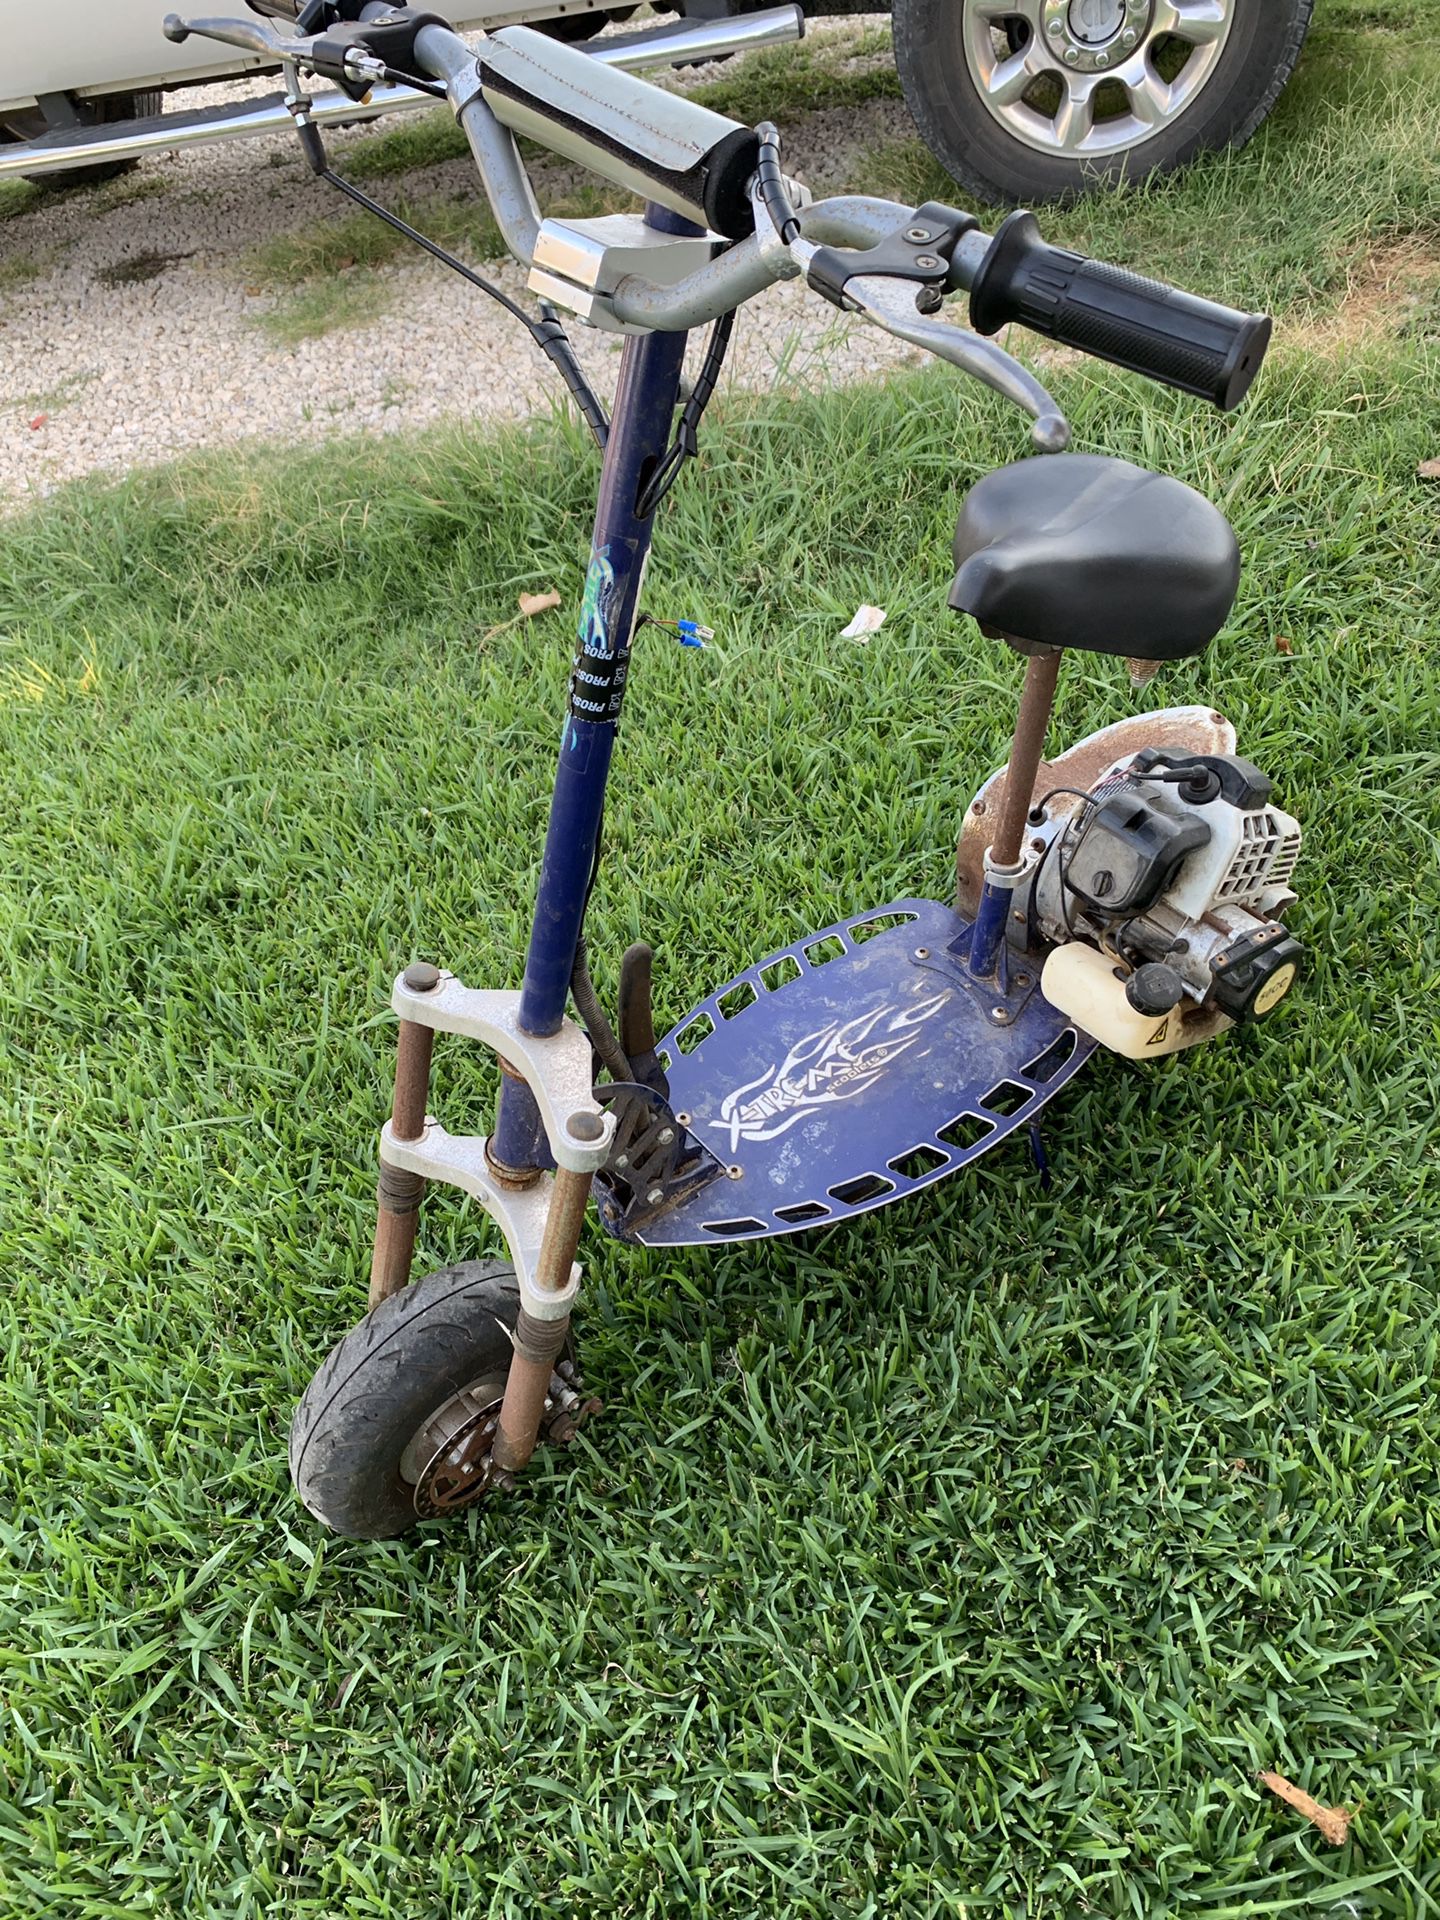 Xtreme 50cc motor scooter